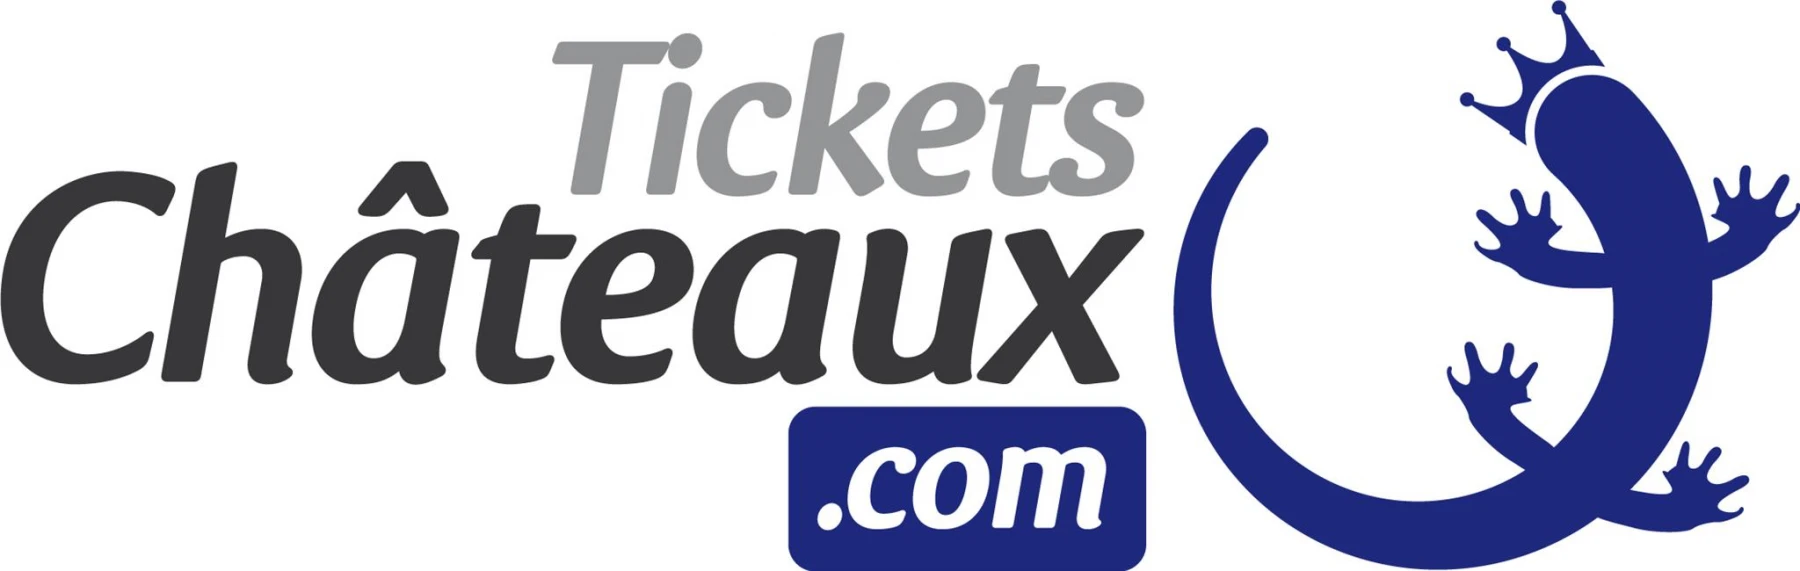 tickets-chateaux.com